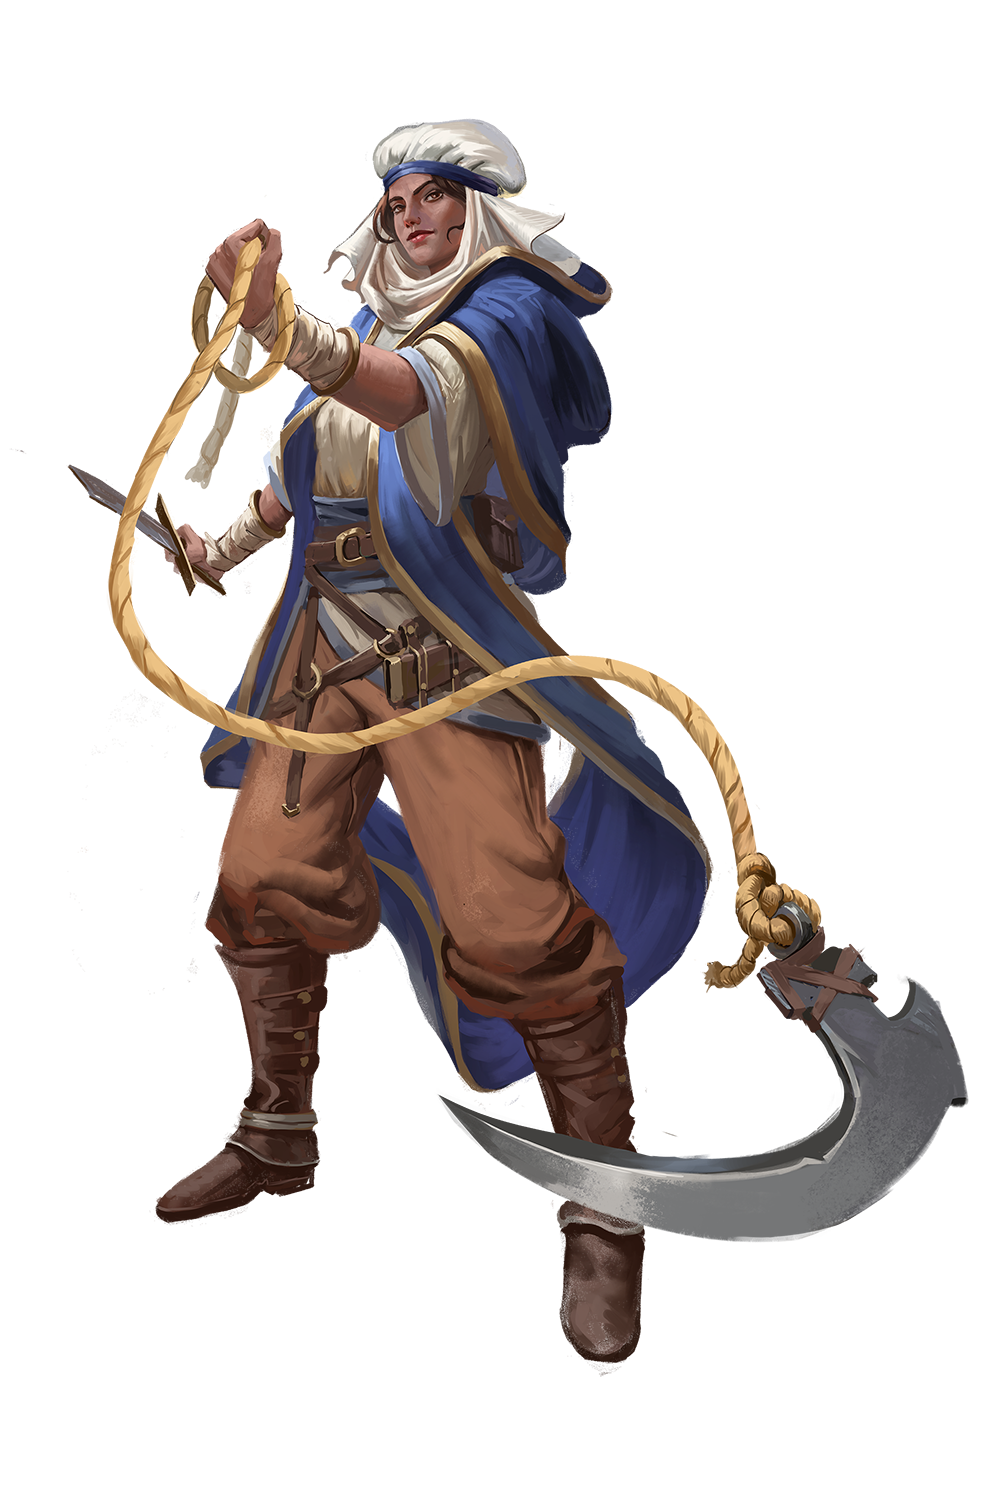 Usij Cultist. A woman in a blue cloak and white head covering wields a sword in one hand as the other grips onto a rope with a curved blade at the other end